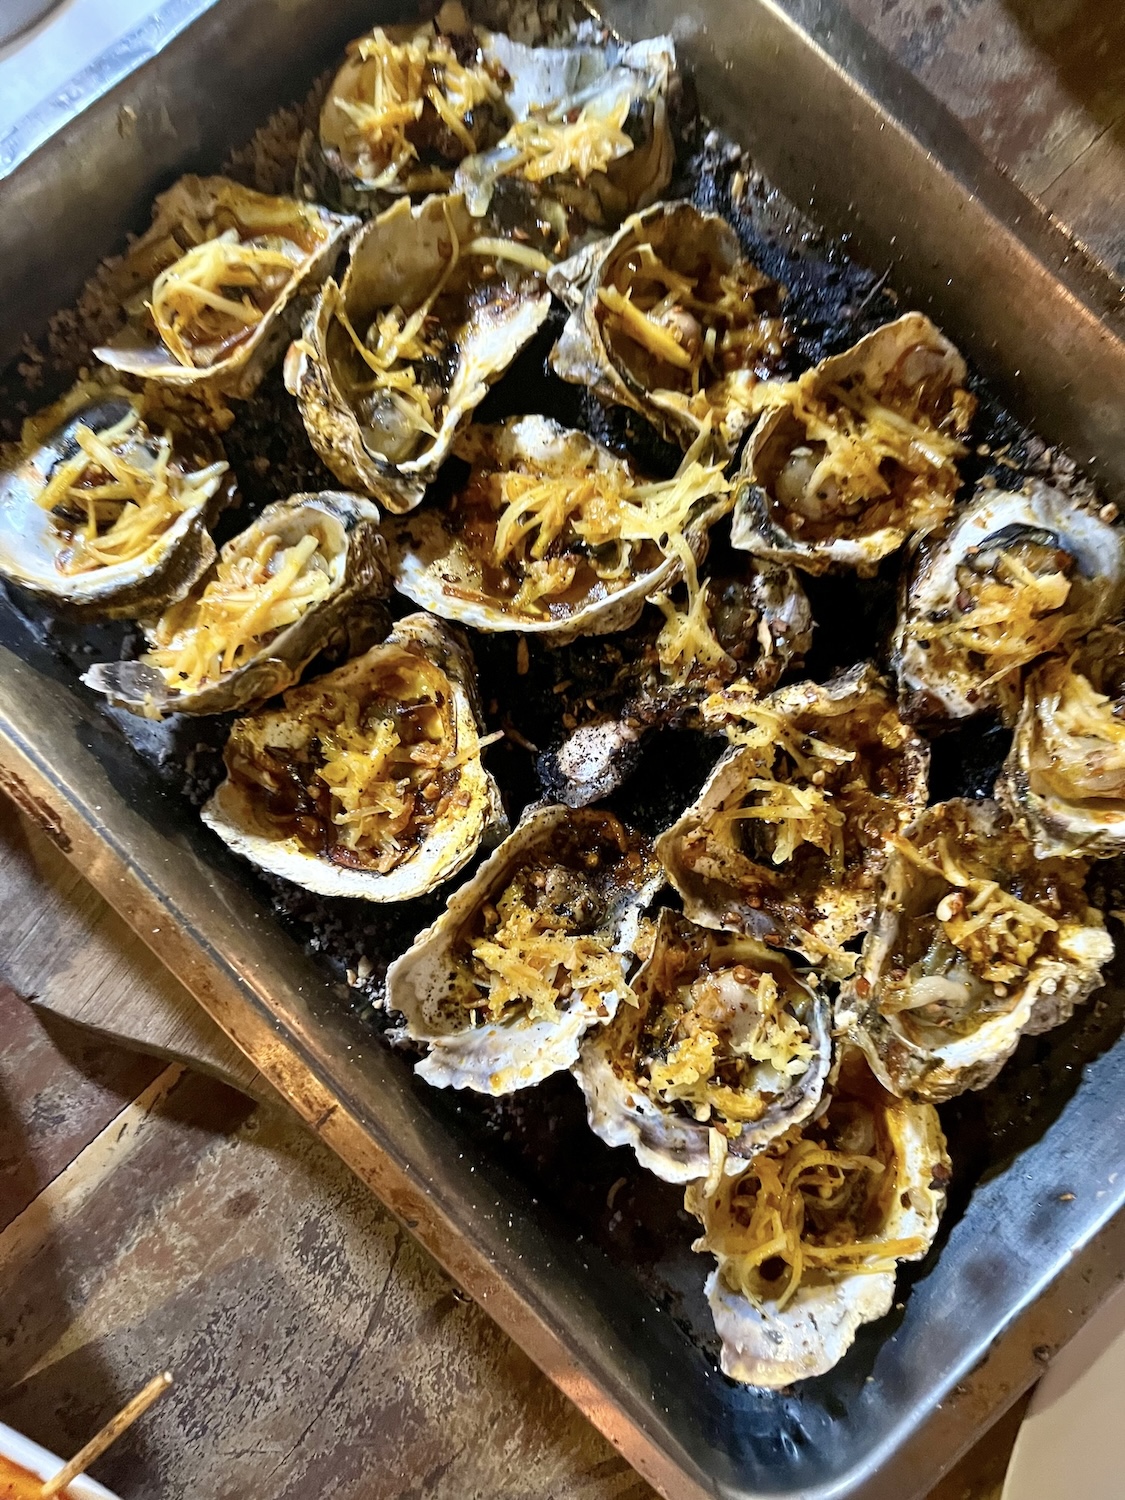 Iloilo City's 8 Villa Beach's grilled and baked oysters